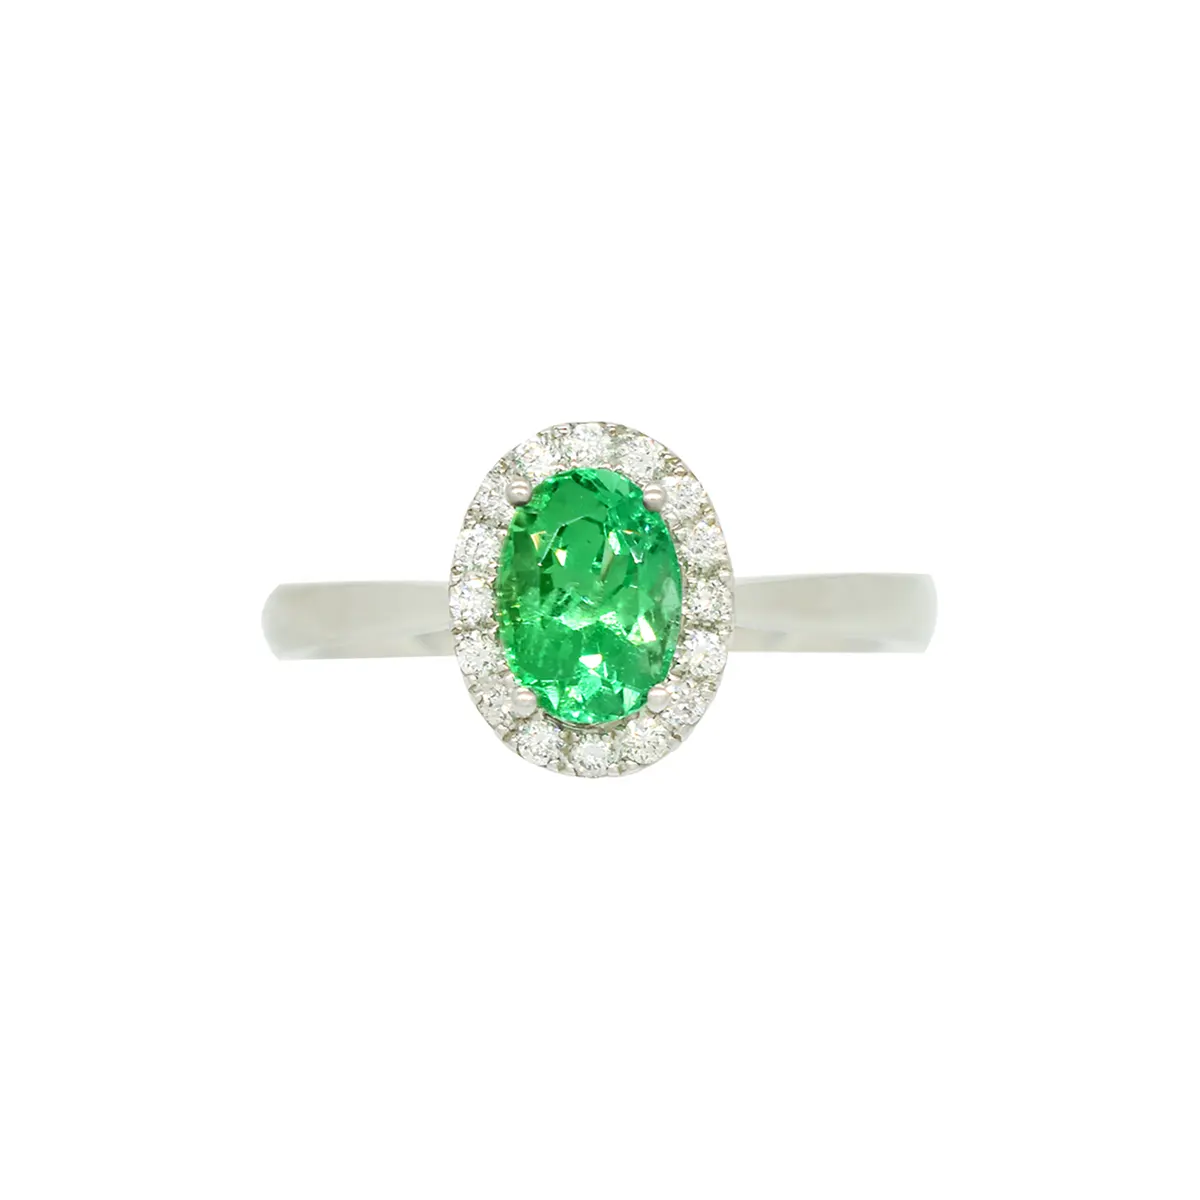 18K White Gold Cluster Emerald Ring in Diamond Halo With Stunning Oval Shape Emerald